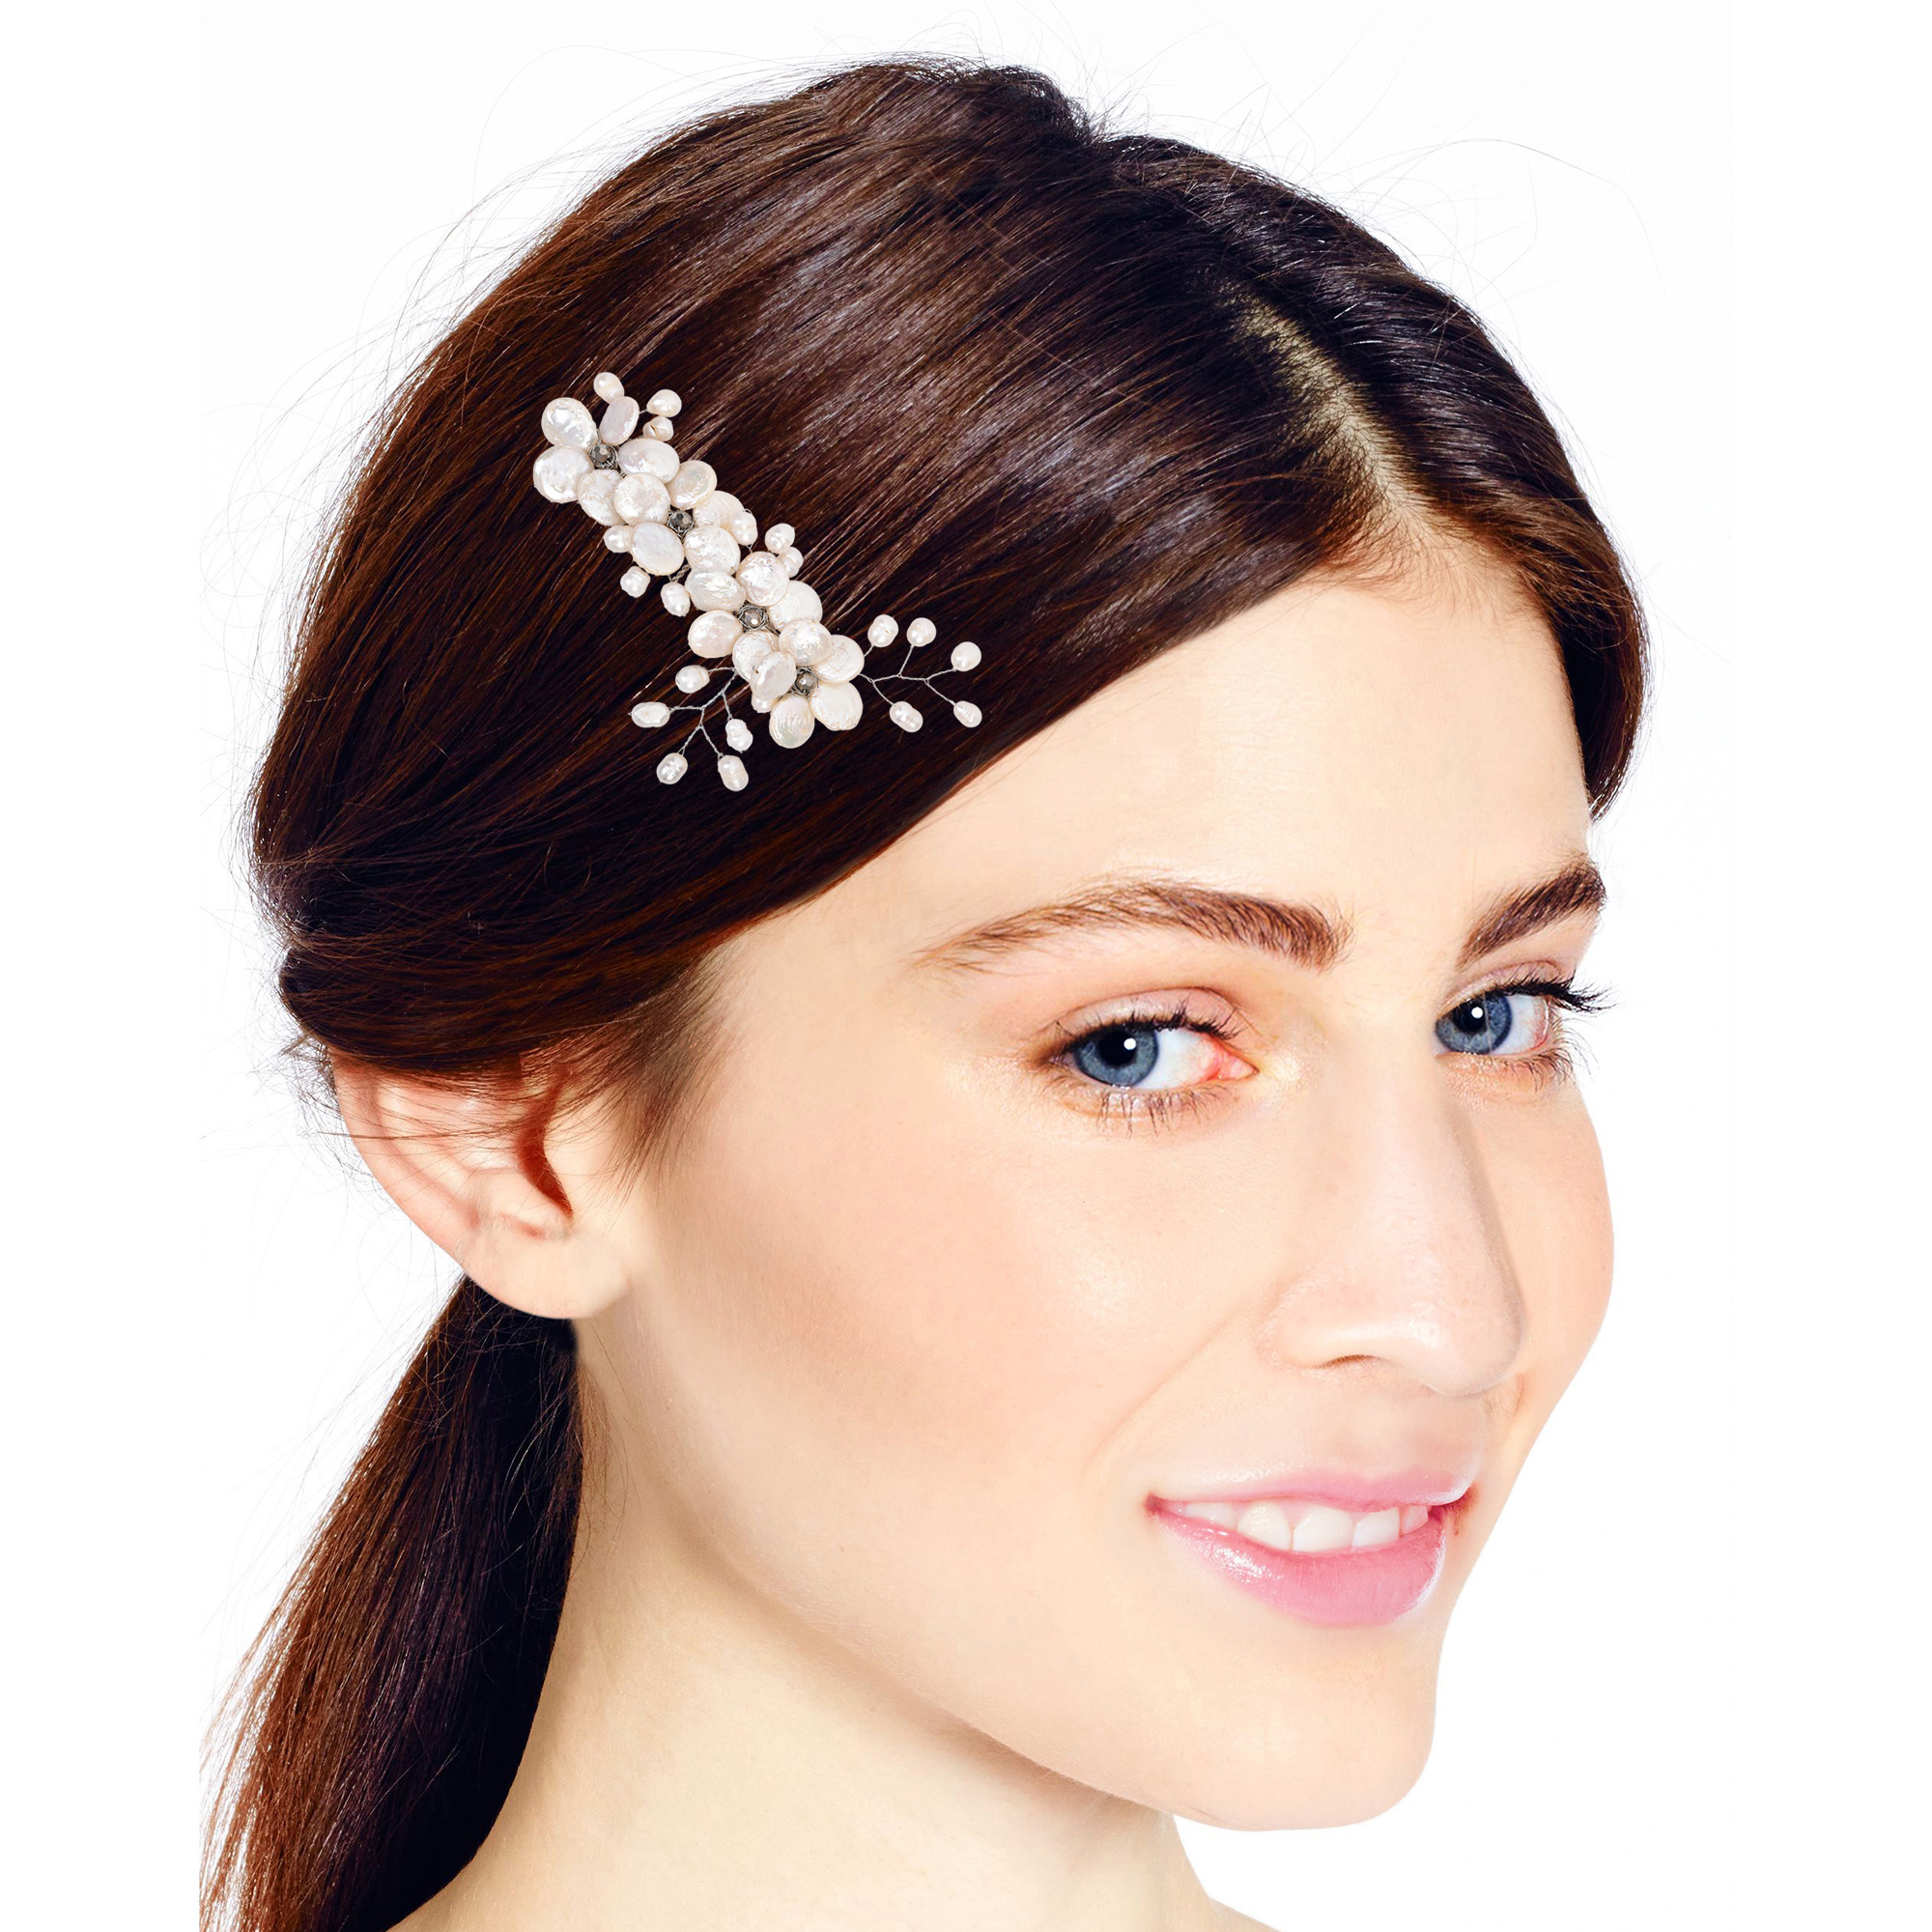 Floral Wreath Freshwater Coin Pearl Bridal Hair Comb - image 3 of 5